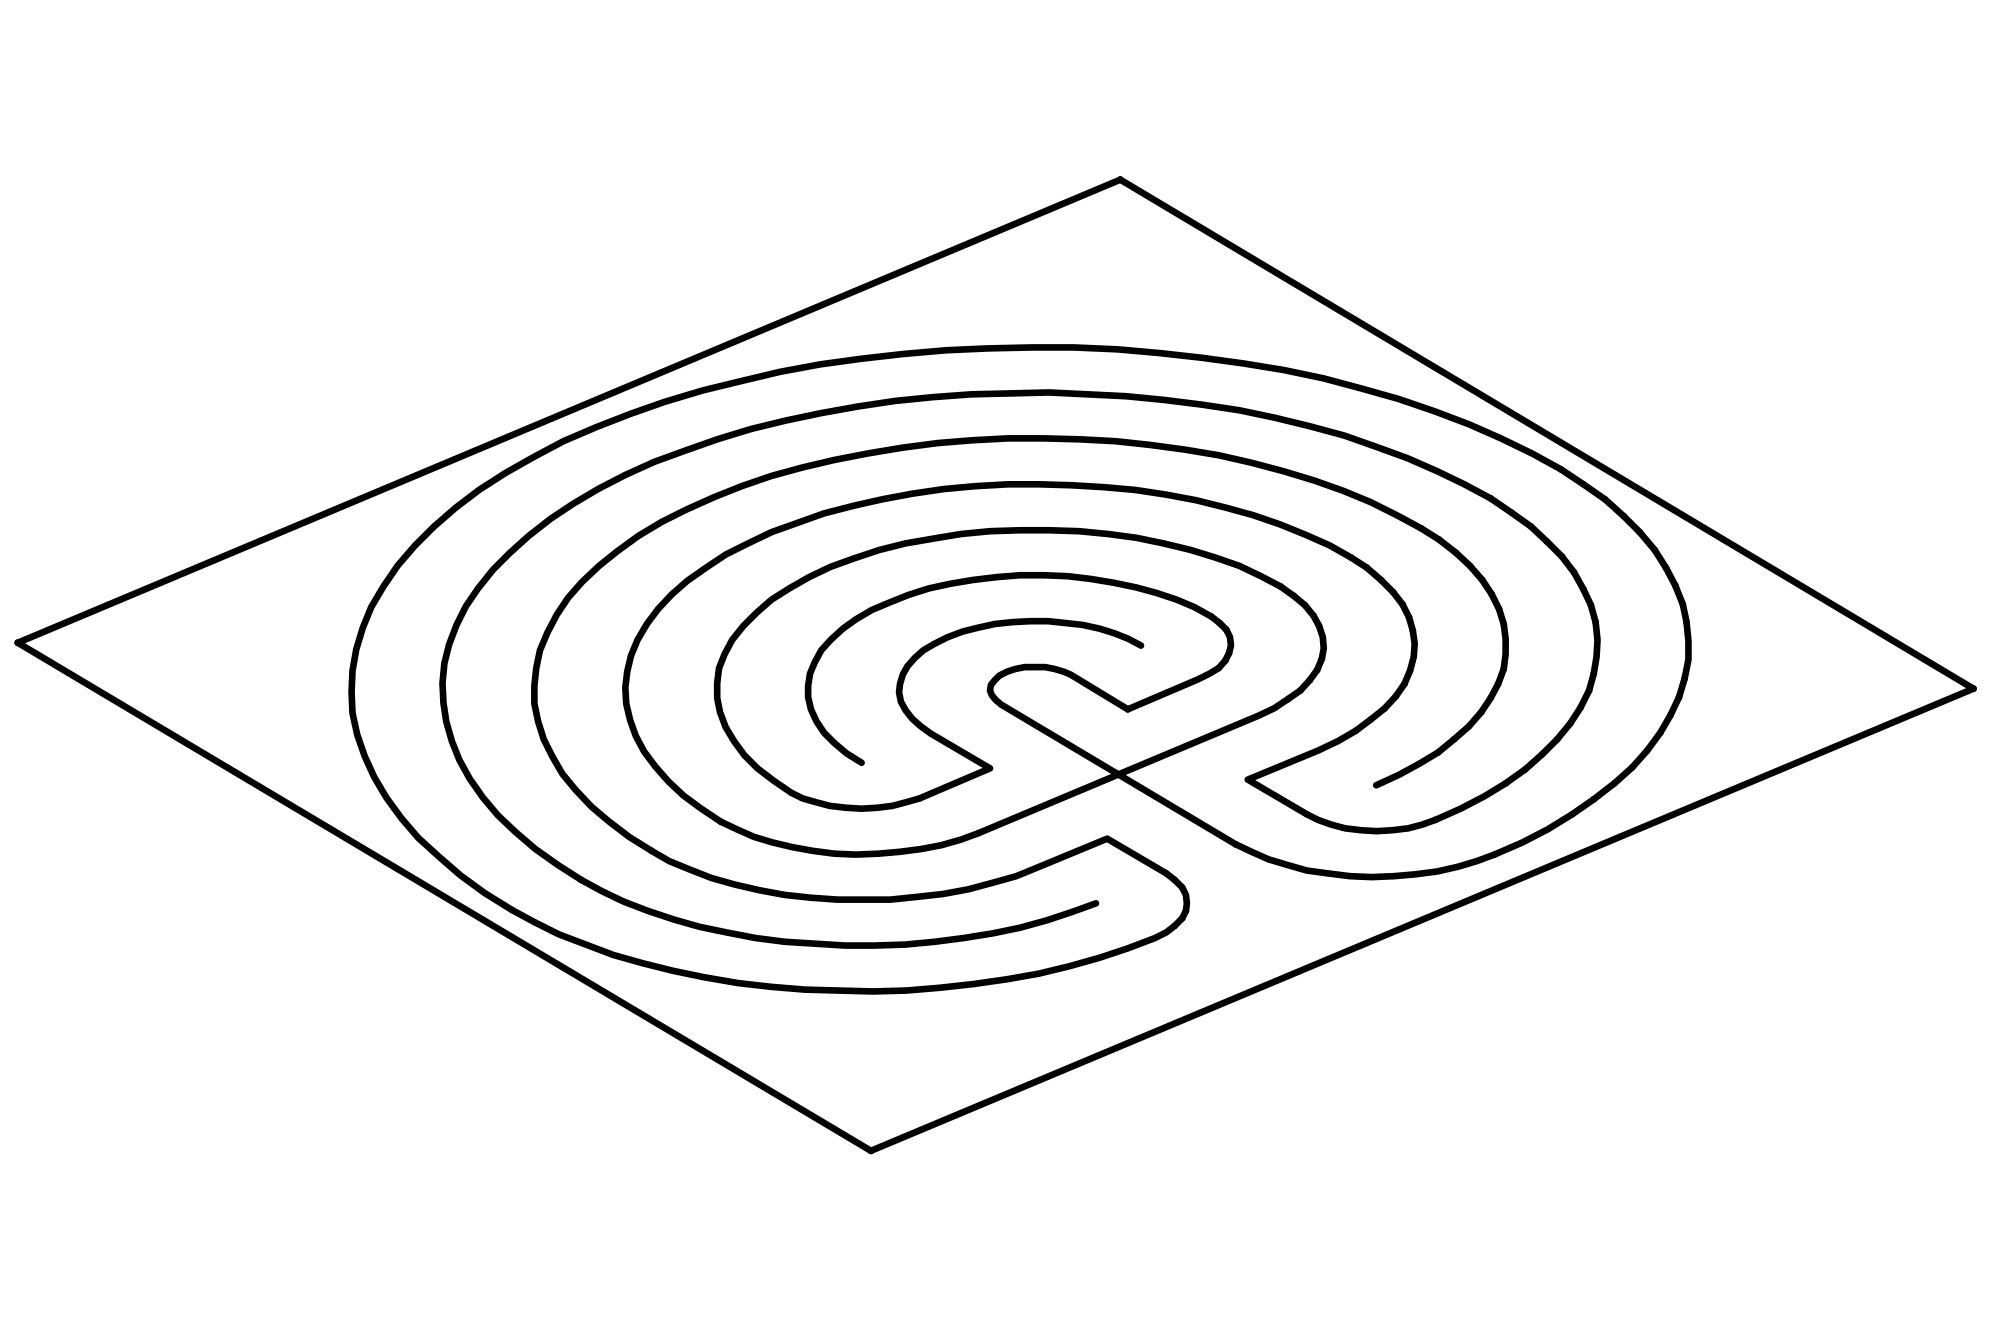 EVOPED® Outdoor Labyrinth, white, 2,40 x 2,60 m, 1-coloured, black printed